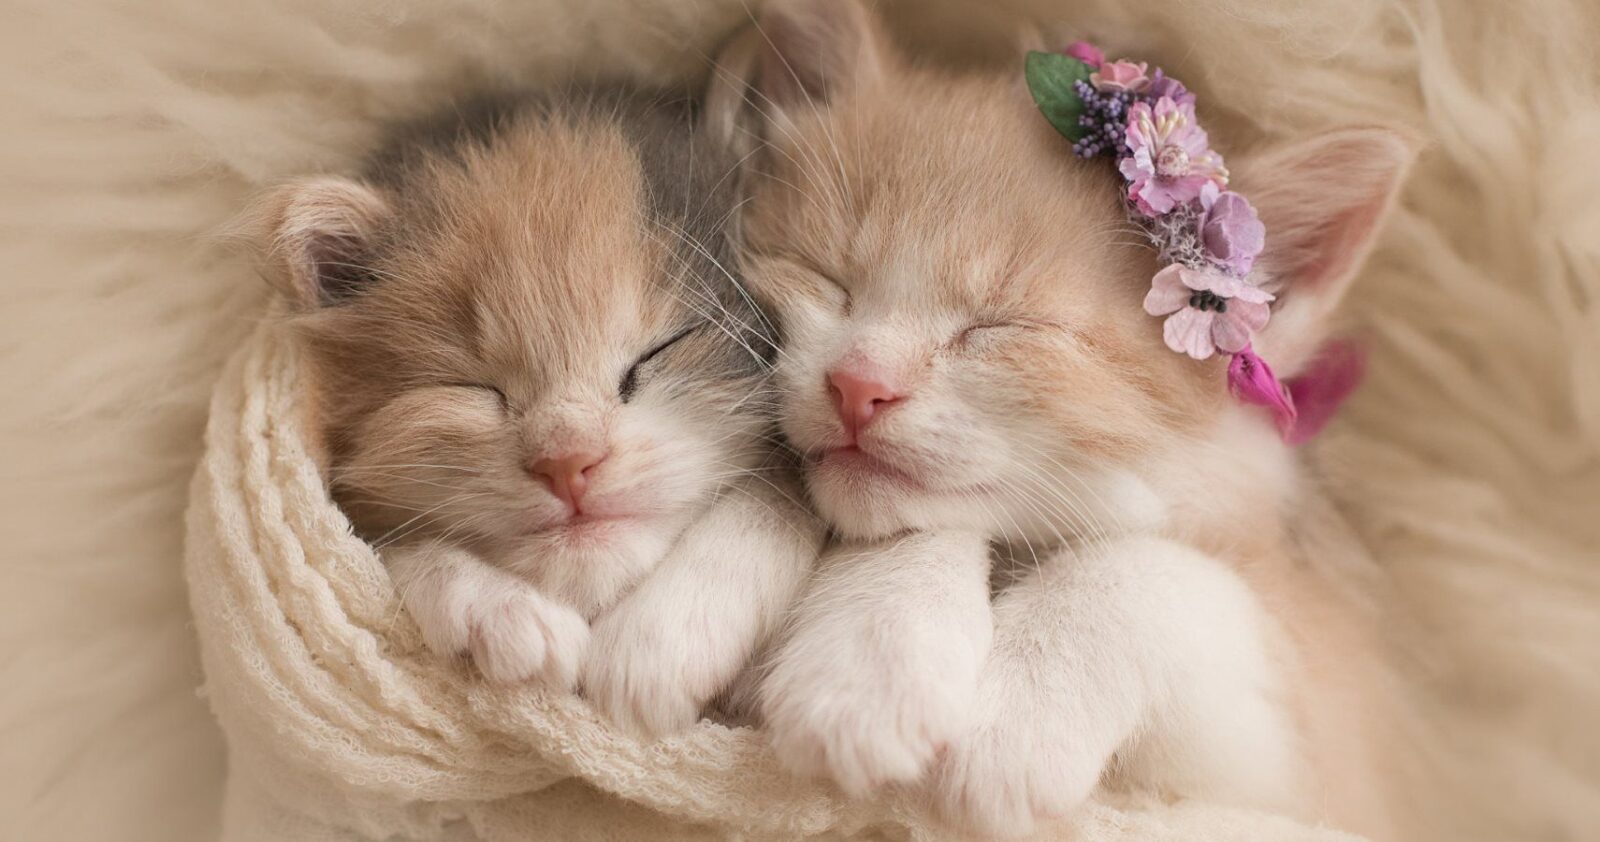 Can You Pass This General Knowledge Quiz While Being Distracted by Adorable Kittens? Cute cat kitten 20